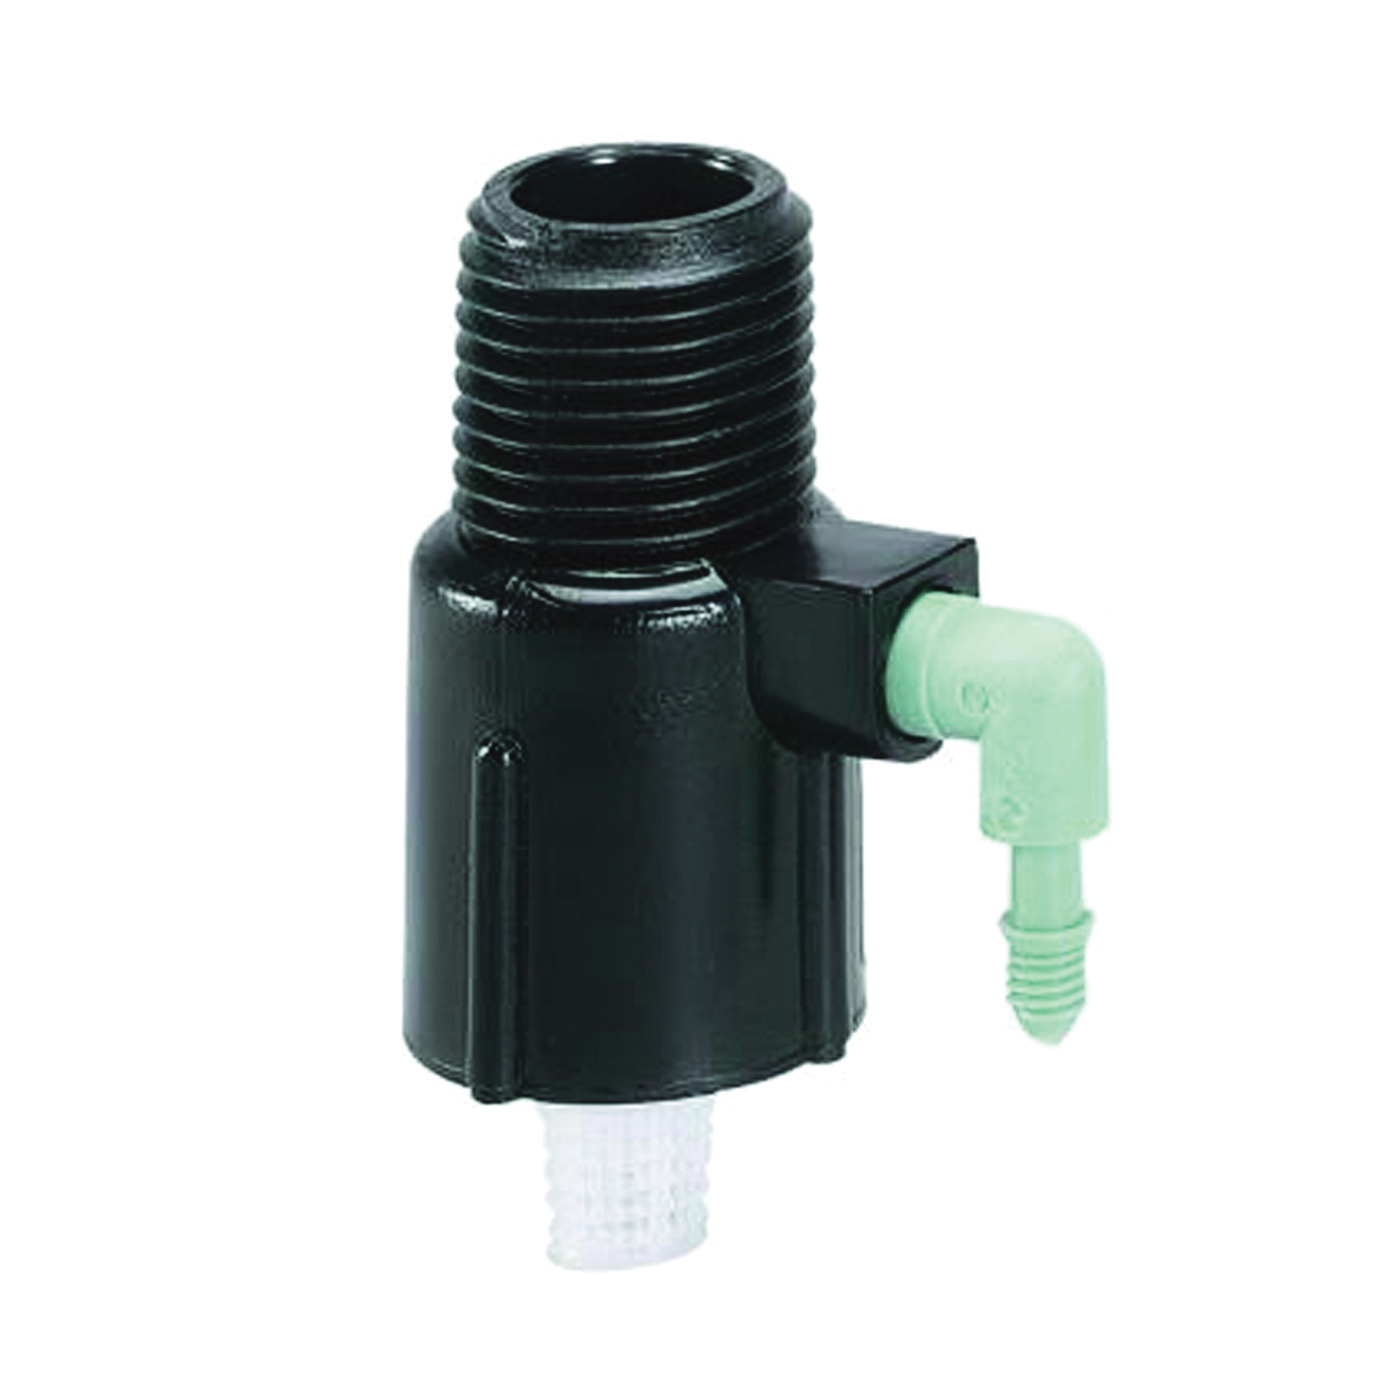 67050 Manifold, 1/2 x 1/4 in Connection, Thread x Barb, 1 -Port, 1/4 in Tubing, Plastic, Black